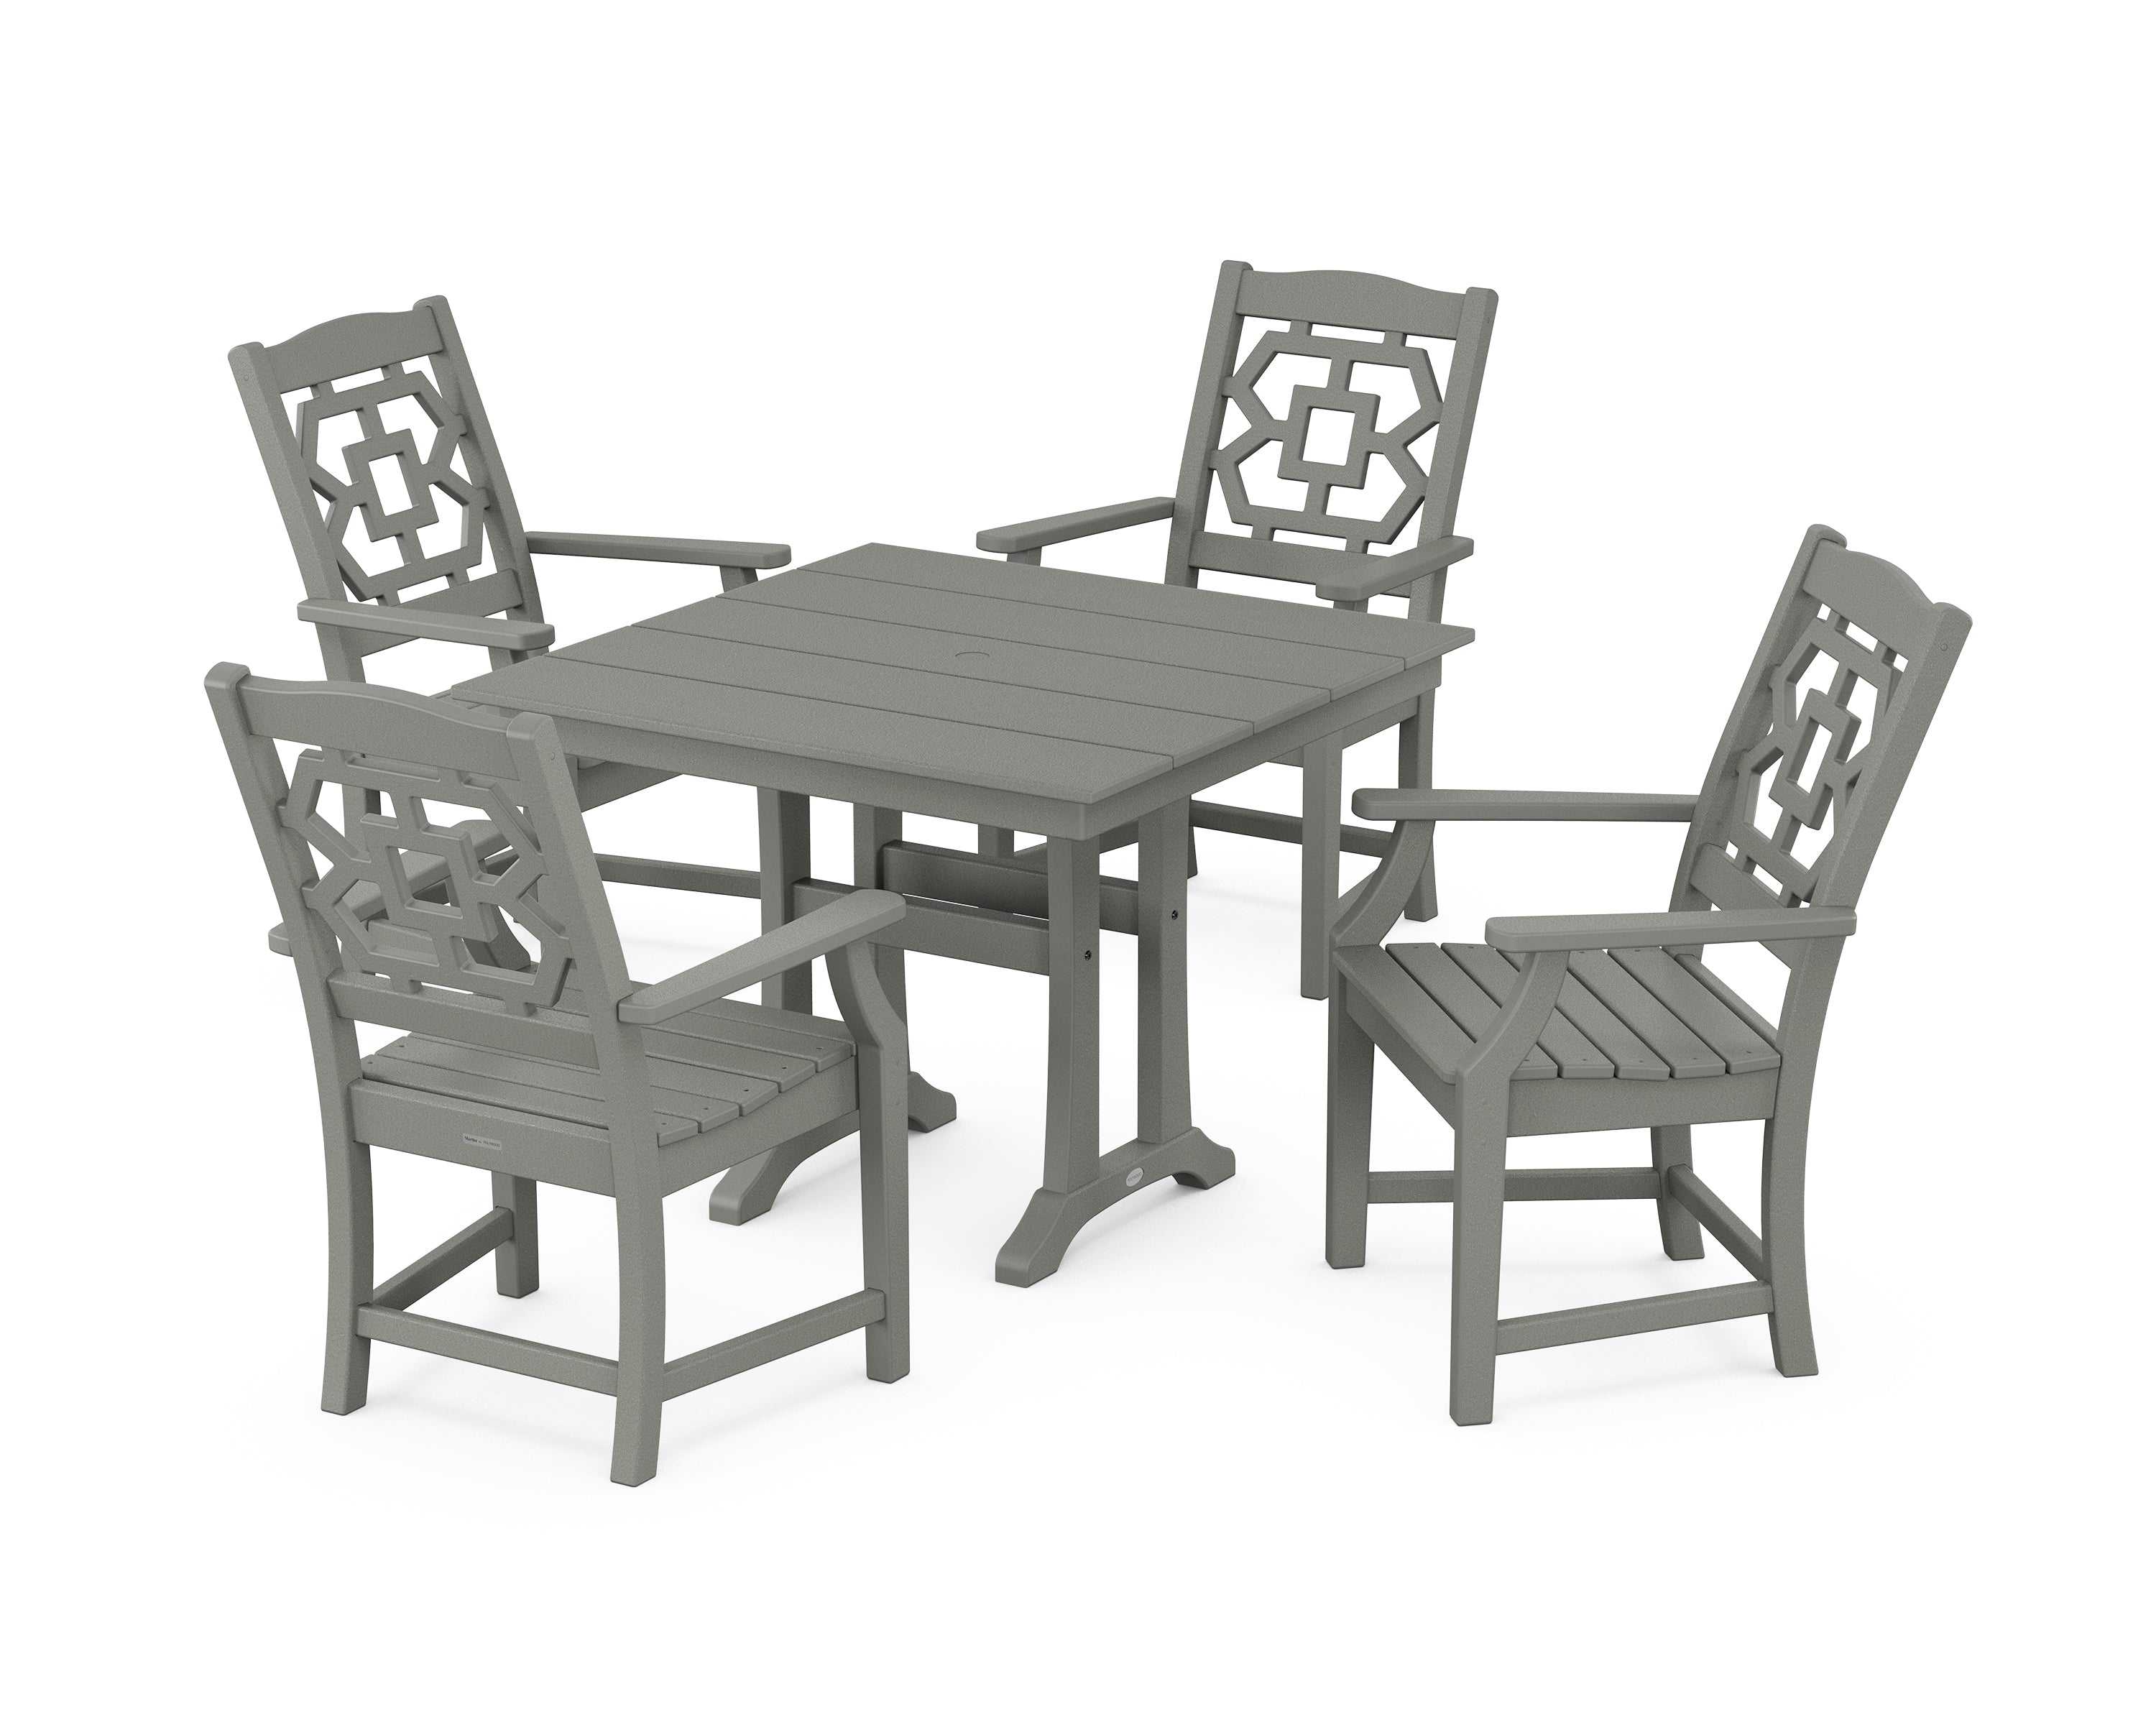 Martha Stewart by POLYWOOD® Chinoiserie 5-Piece Farmhouse Dining Set with Trestle Legs in Slate Grey